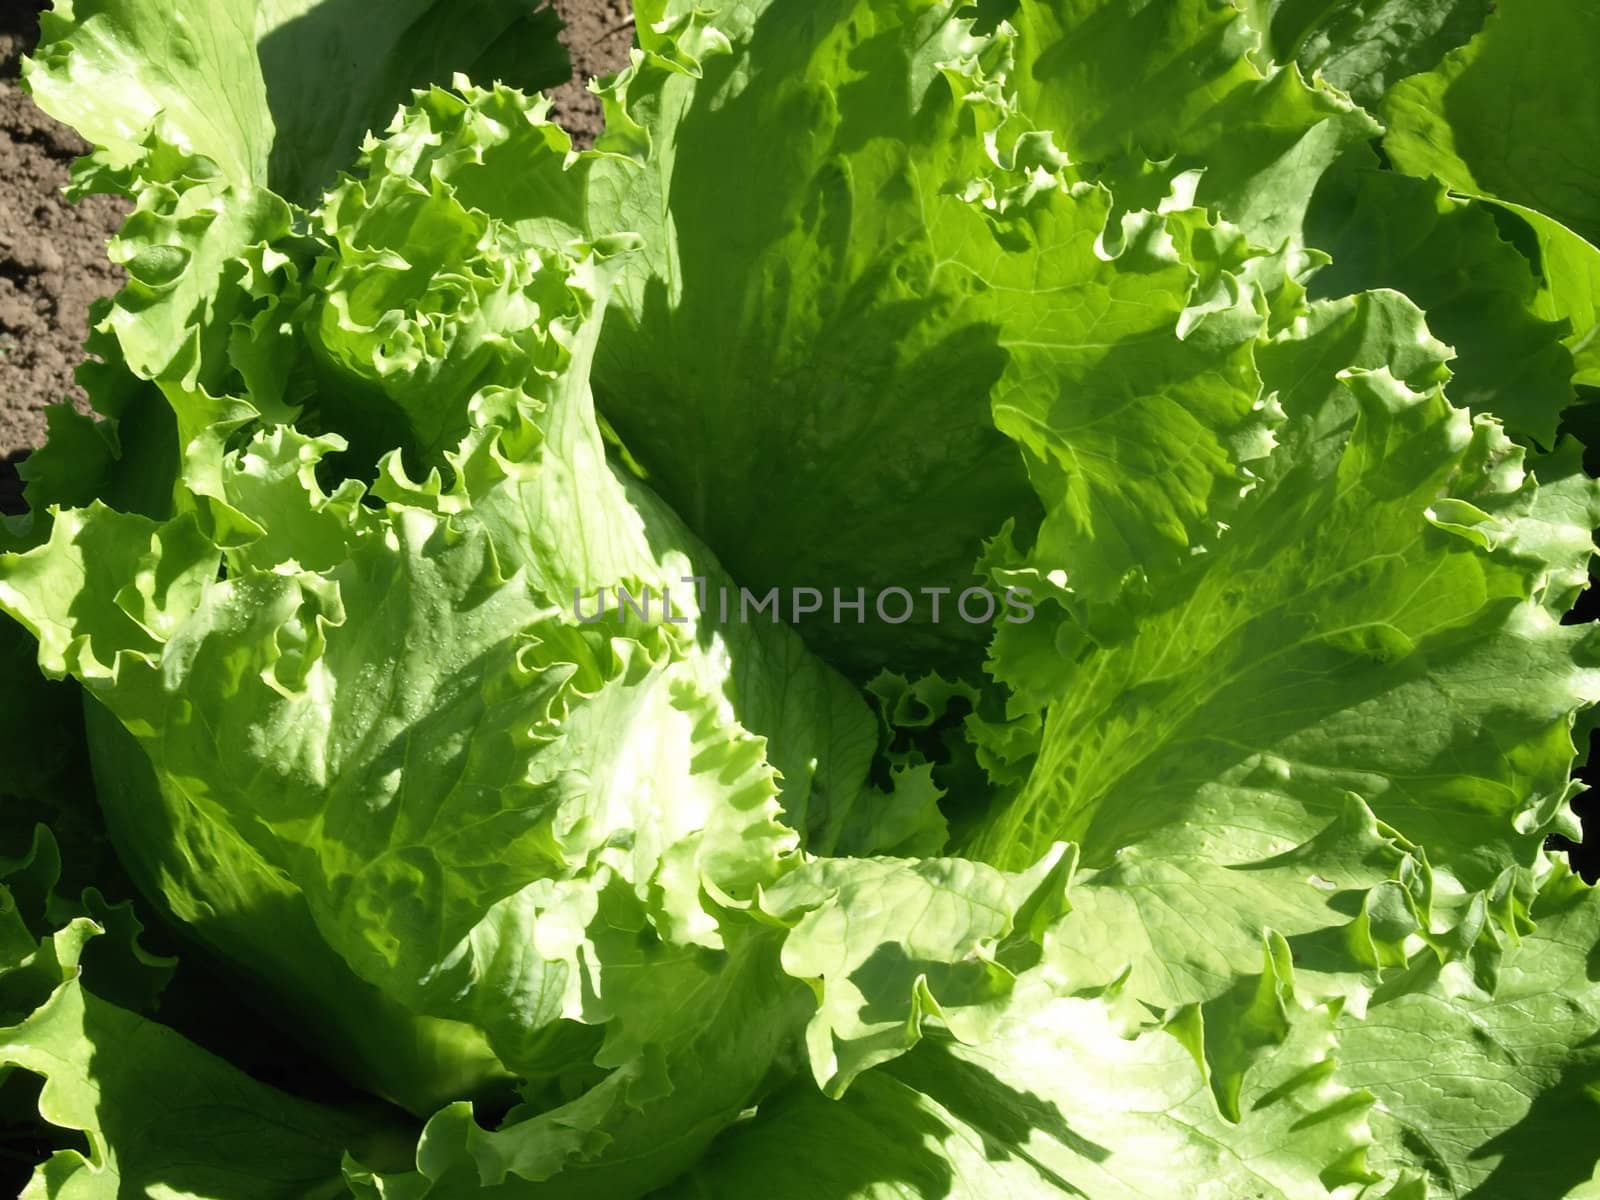 Fresh lettuce still in the ground. Grown in a small vegetable garden at home.